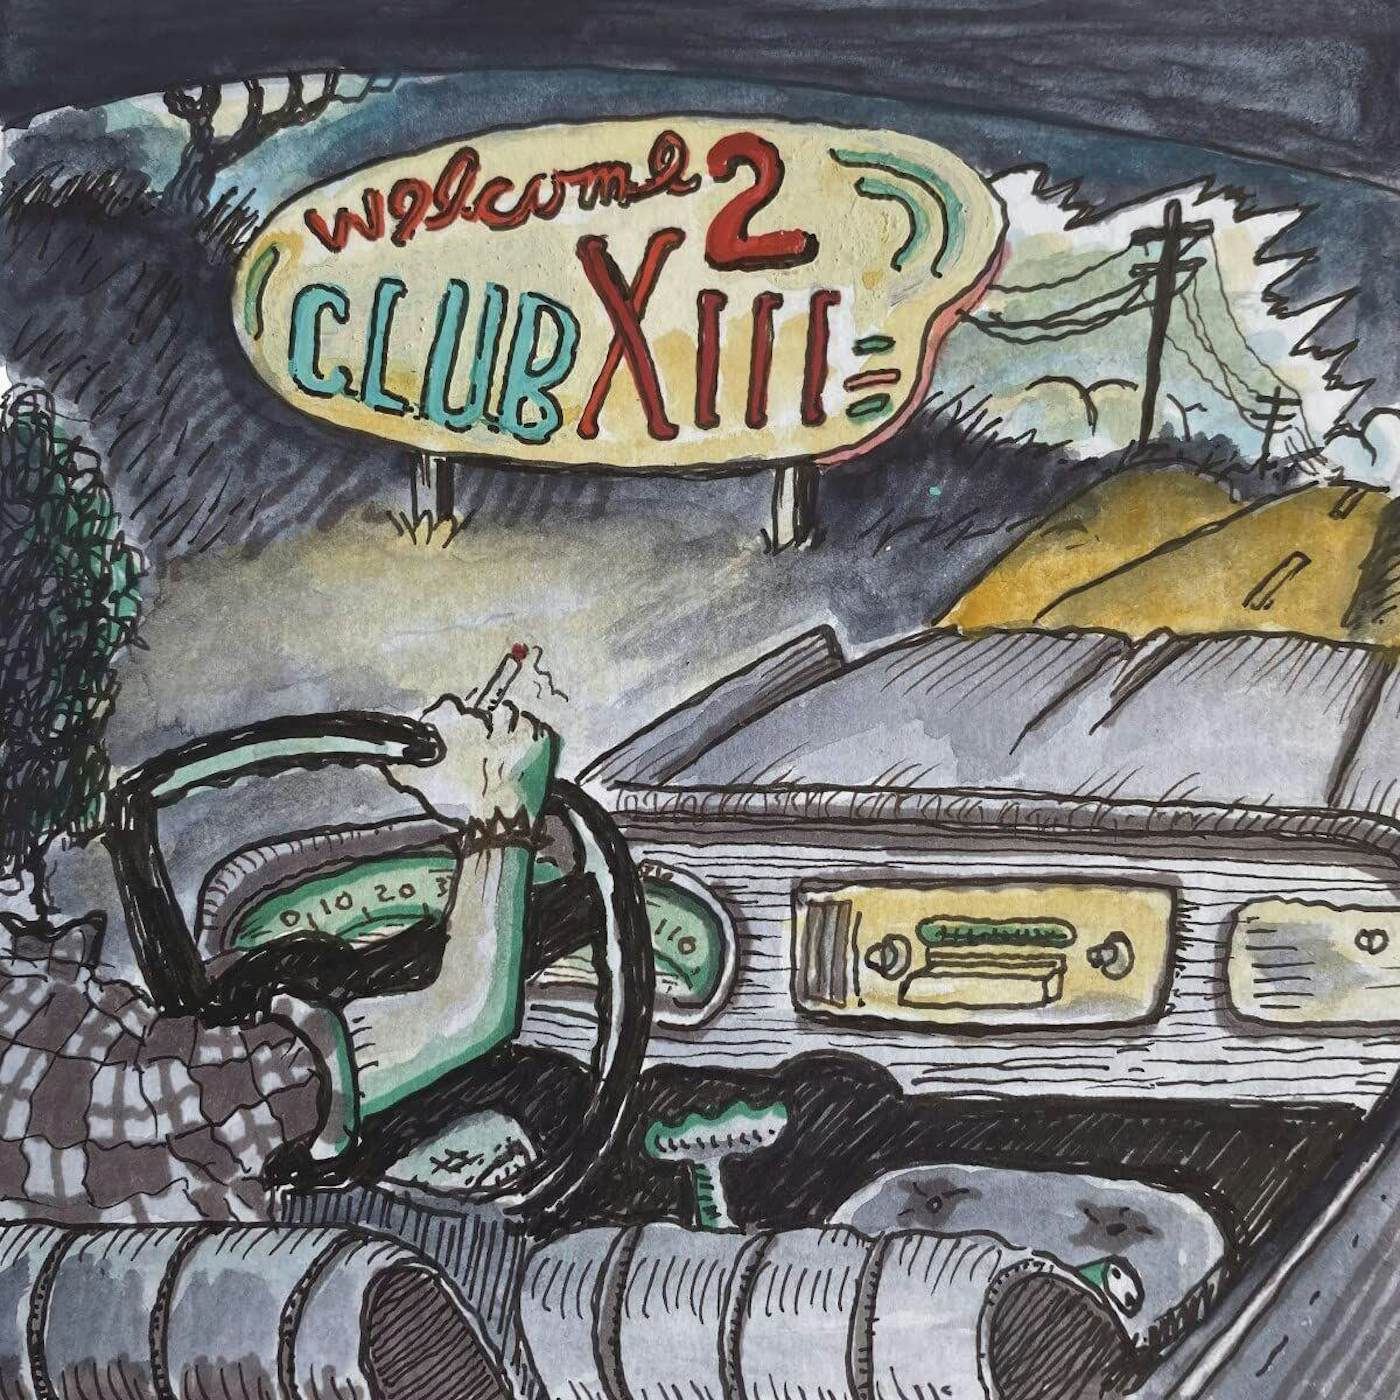 Drive-By Truckers Welcome 2 Club XIII Vinyl Record